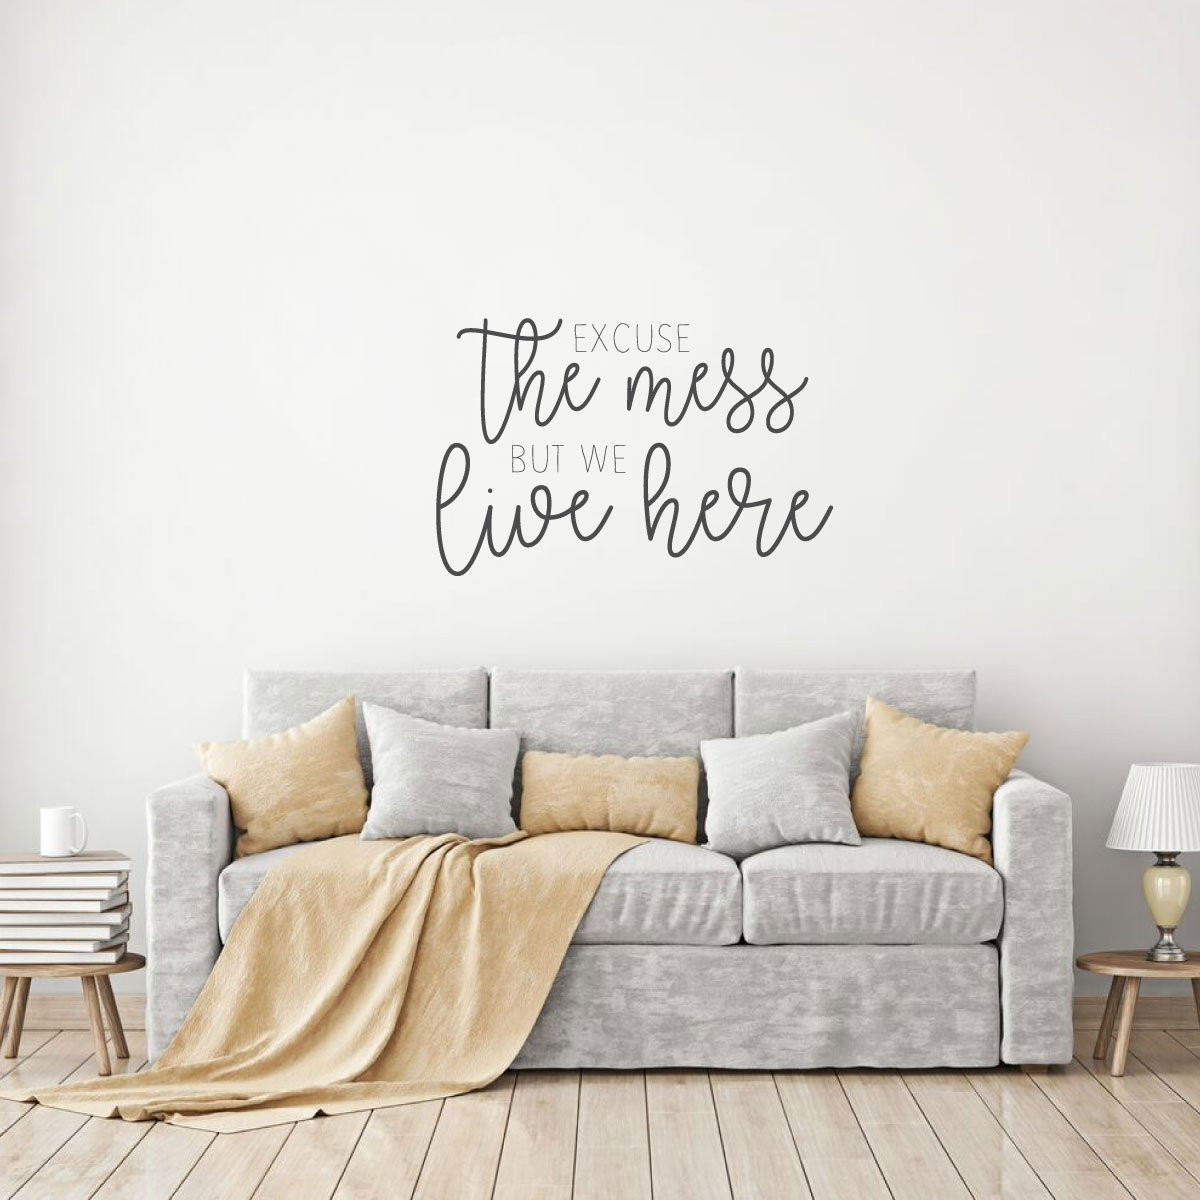 Living Room Wall Decals
 Excuse the Mess Quote for Living Room Vinyl Home Decor